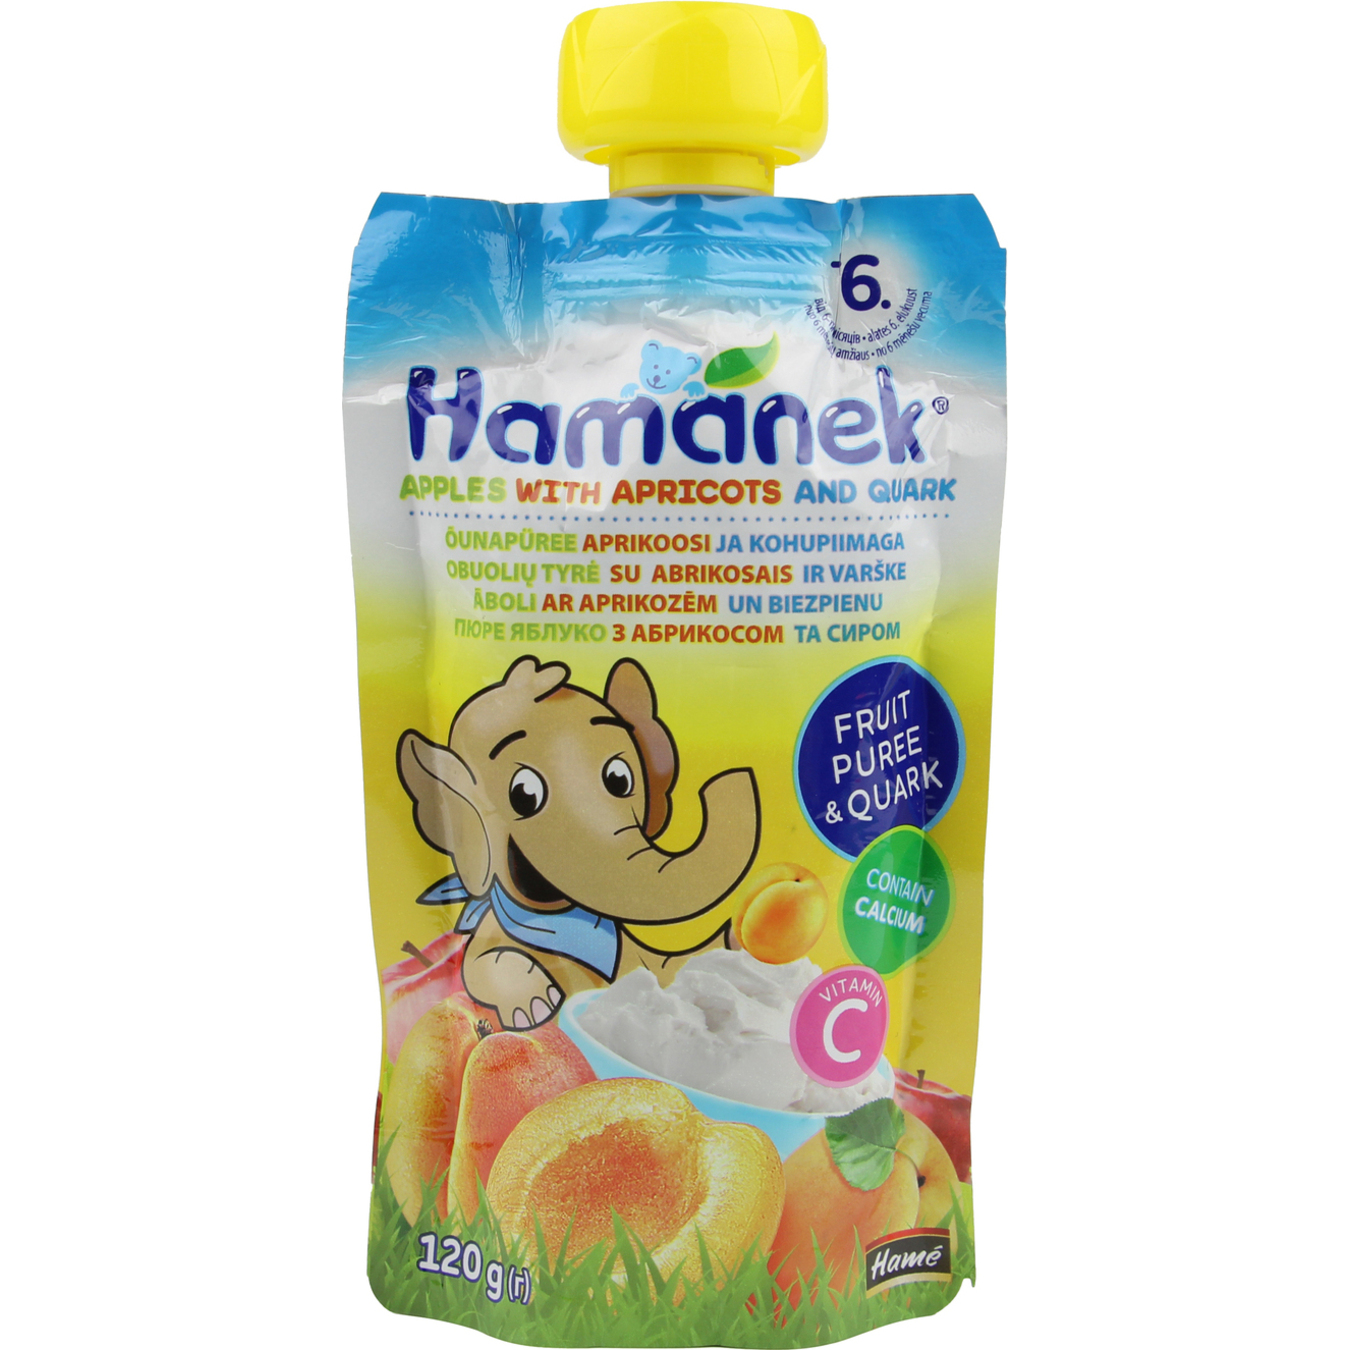 Hamanek Apple-Apricot Puree with Cottage Cheese 120g